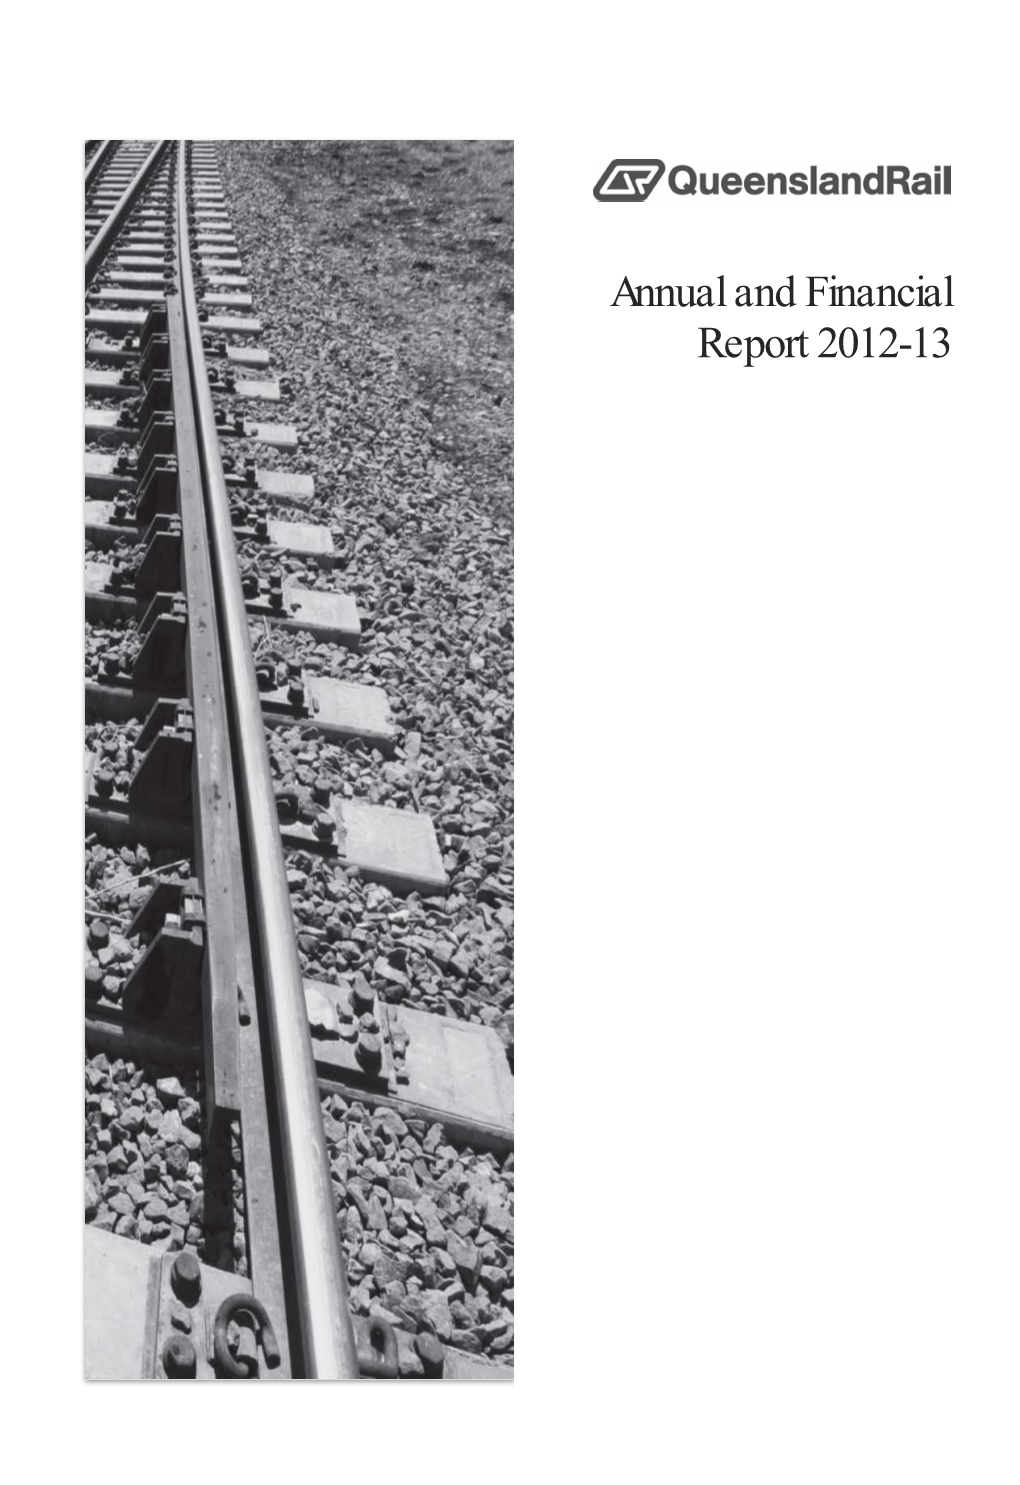 Queensland Rail Annual and Financial Report for the Financial Year (FY) 2012/13